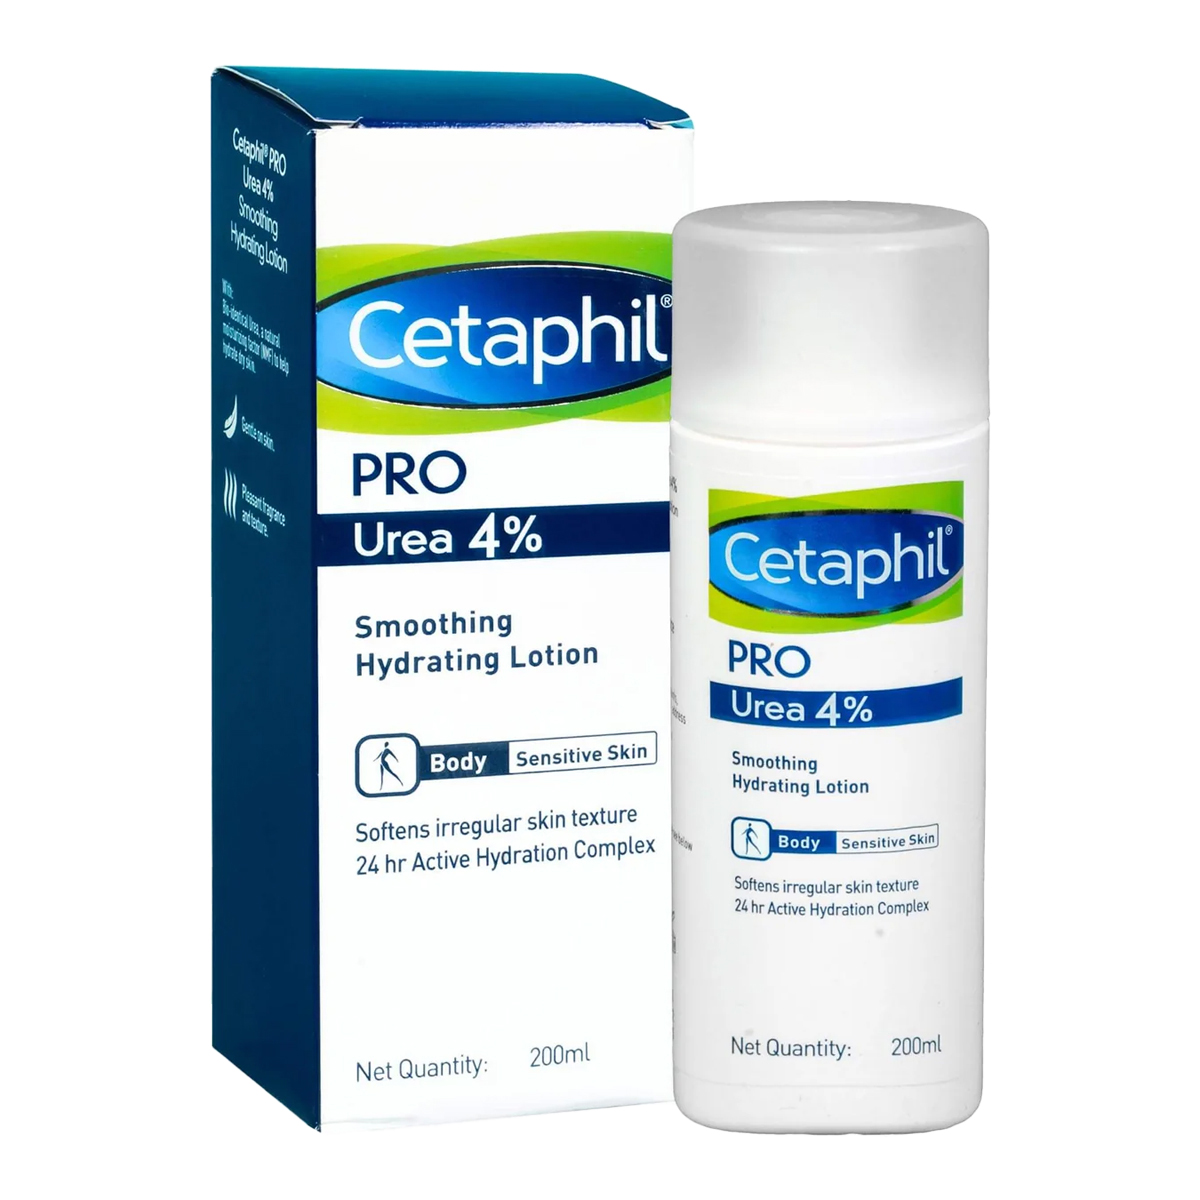 Cetaphil Pro Urea 4% Smoothing Hydrating Lotion For Body For Sensitive Skin, 200ml